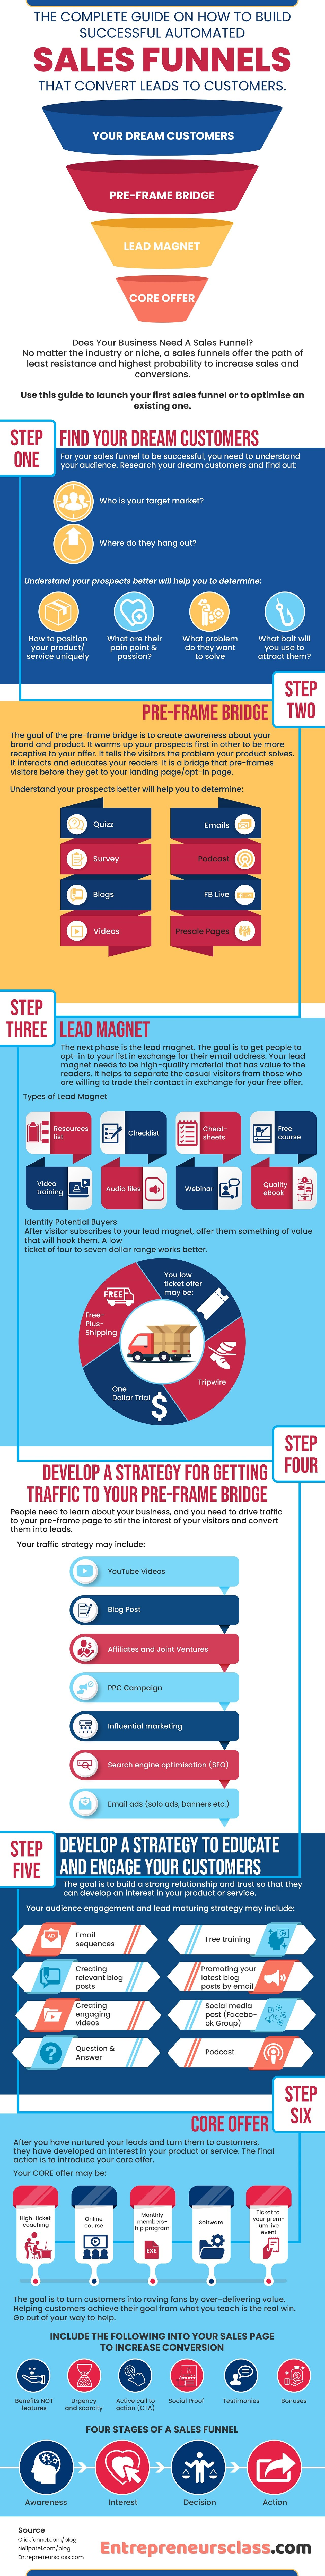 6 Steps To Build A Sales Funnel That Converts Visitors Into Customers #infographic